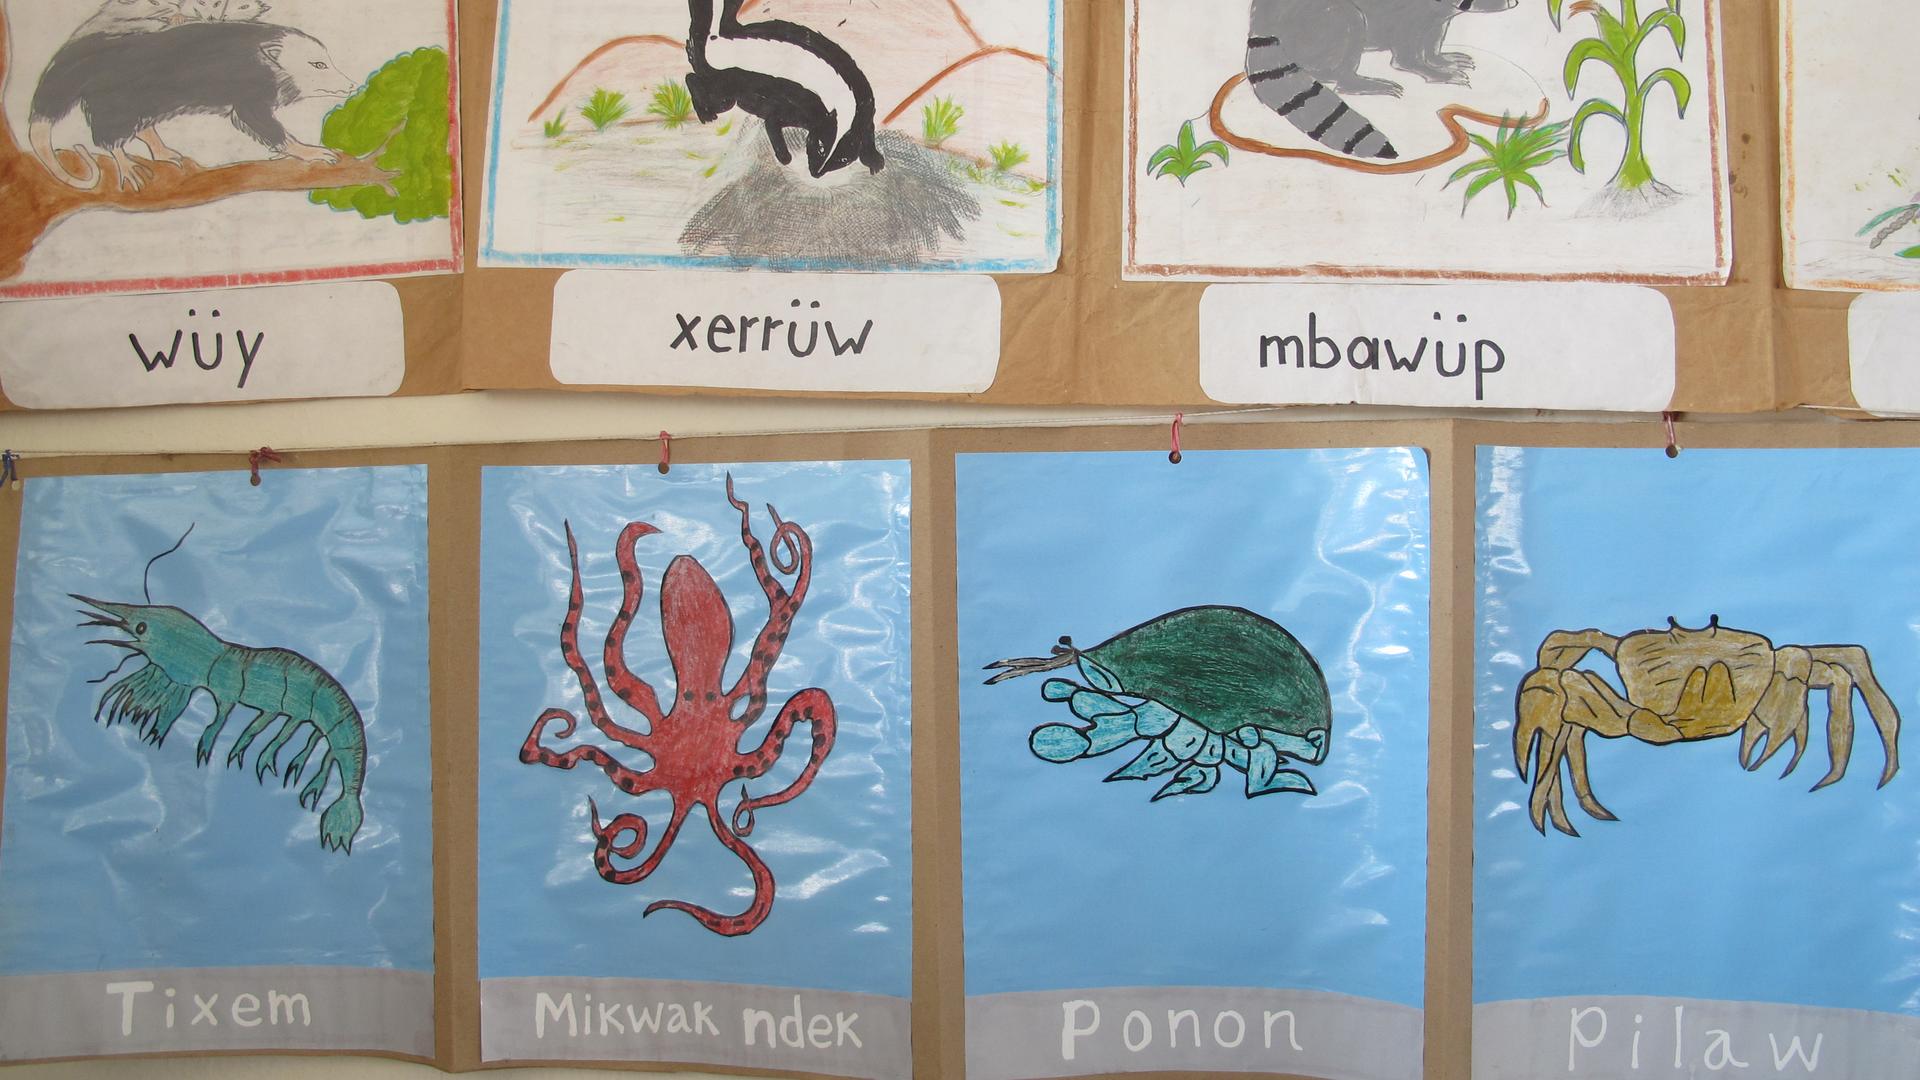 Pictures of local animals on the wall of a bilingual school